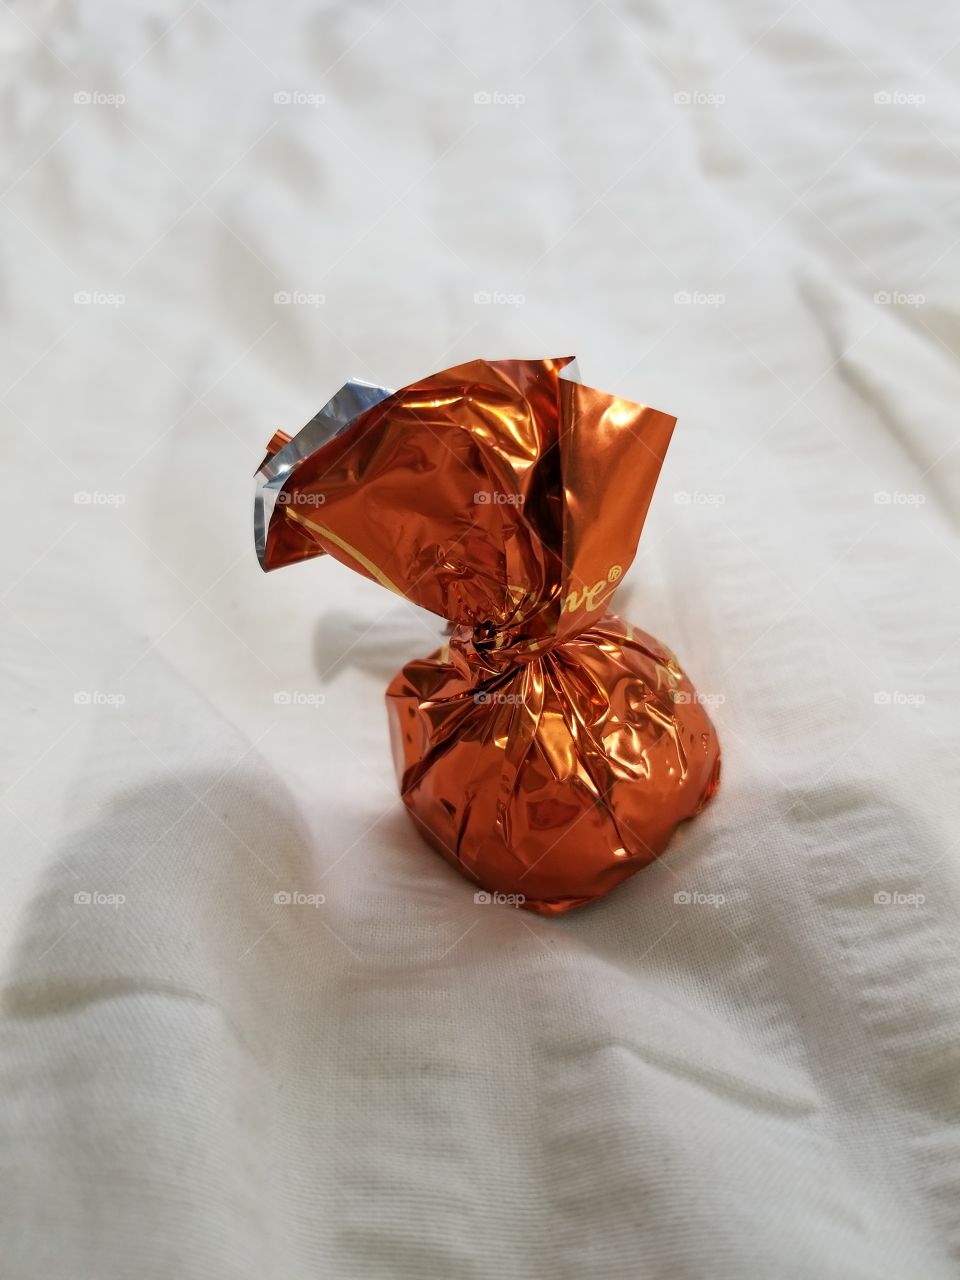 a piece of wrapped chocolate